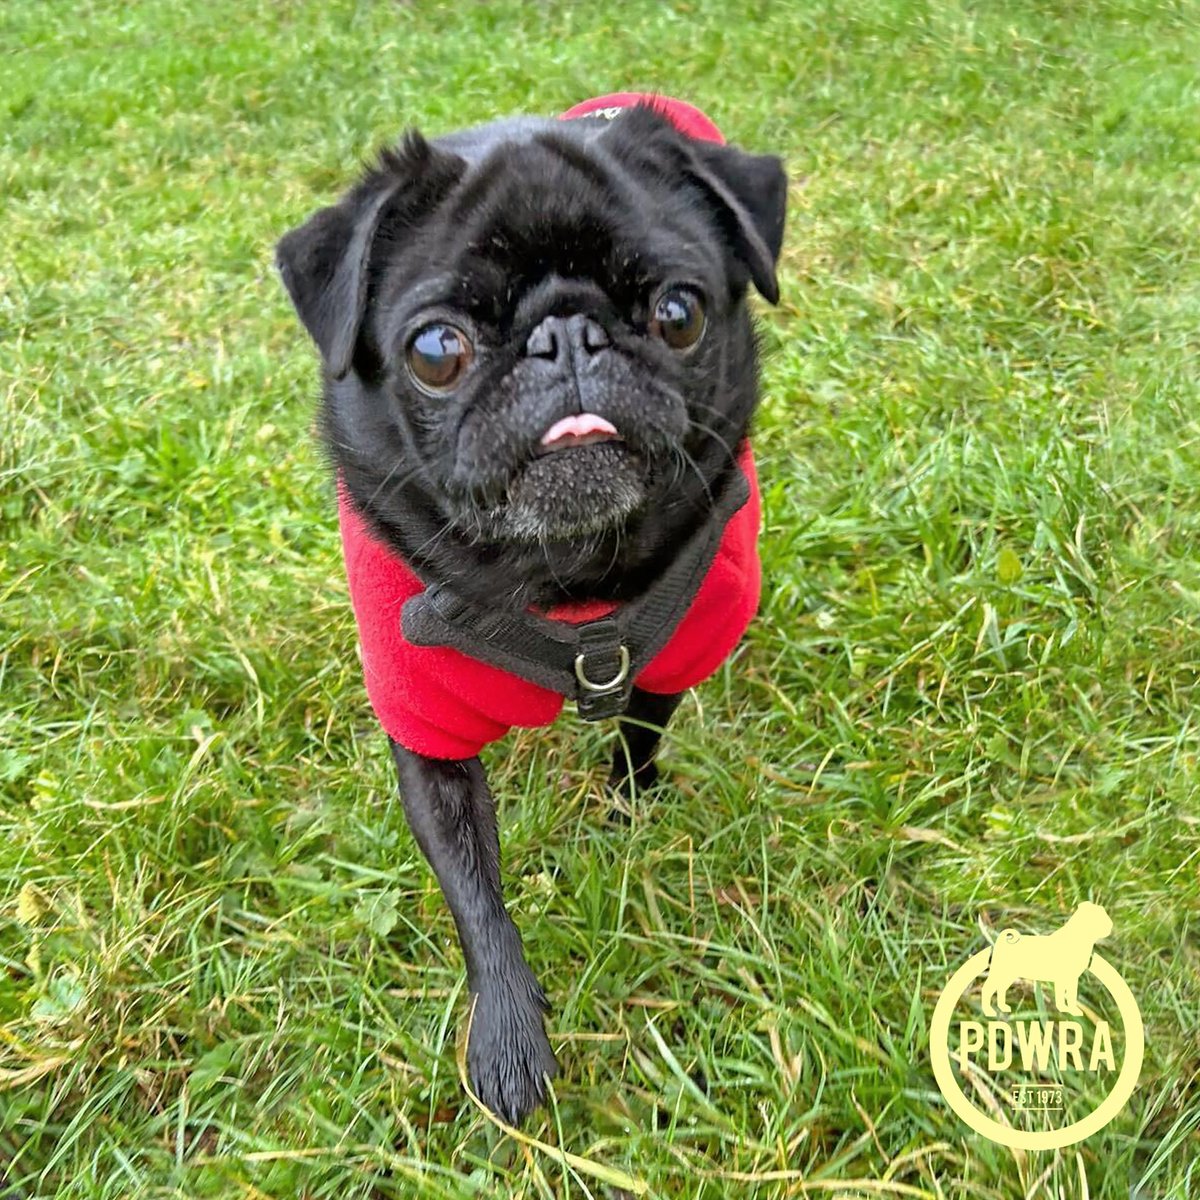 In case you missed last week’s newsletter, this is Reggie, who due to some mobility issues is one of our long-term fosters. Reggie has been a big hit helping out in the local community -
ecs.page.link/tNFnT 
#pdwra #pugcharity #pugwelfare #friendsofwelfare #foreverhome #pug